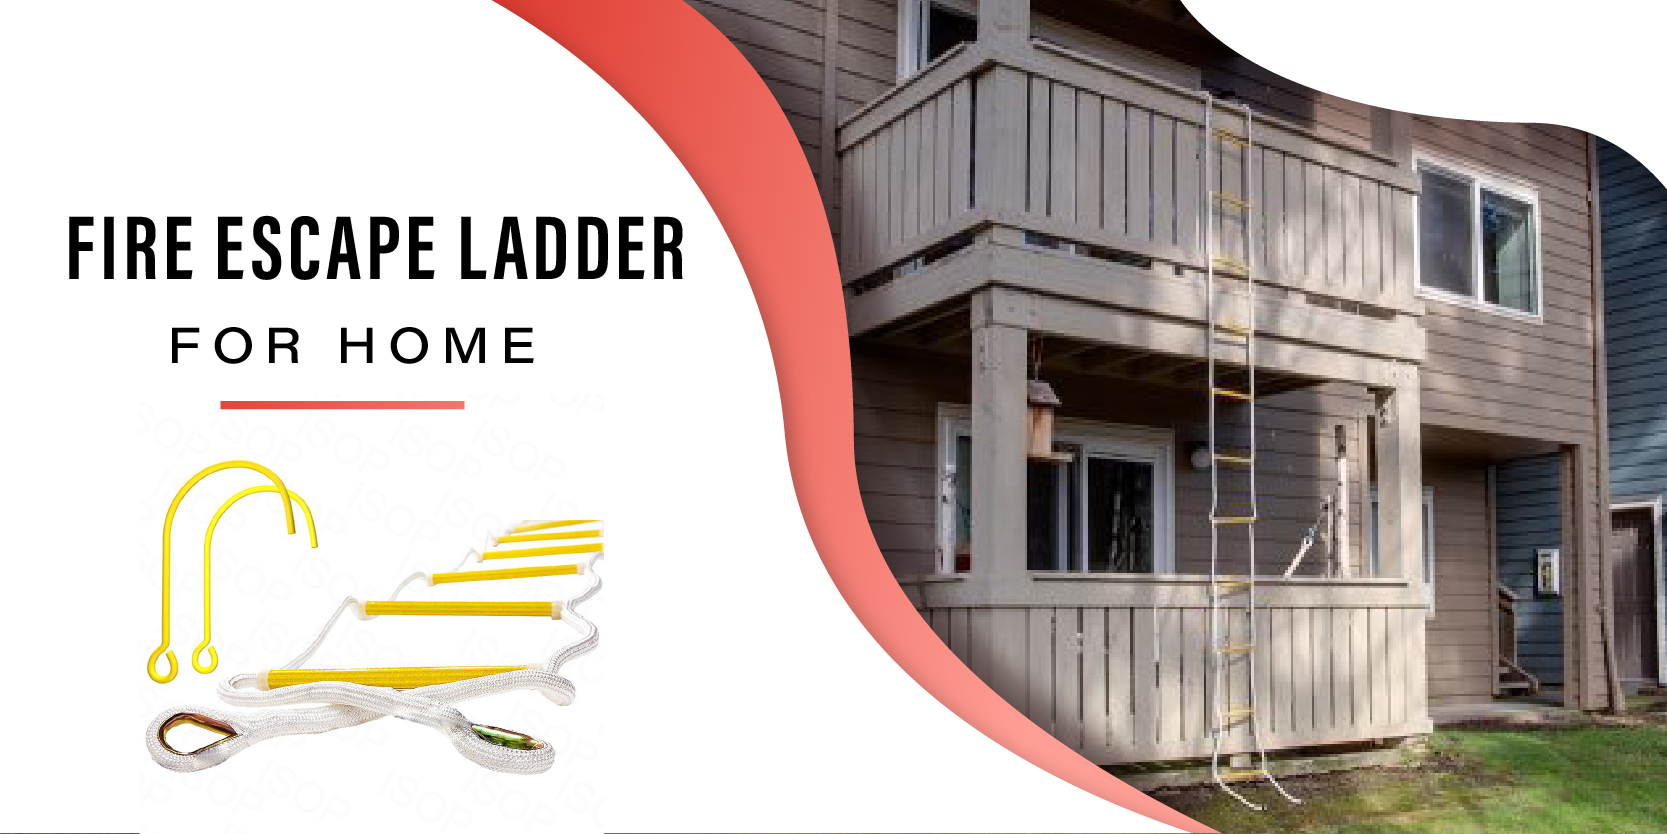 How to Use Fire Escape Ladder for Pets